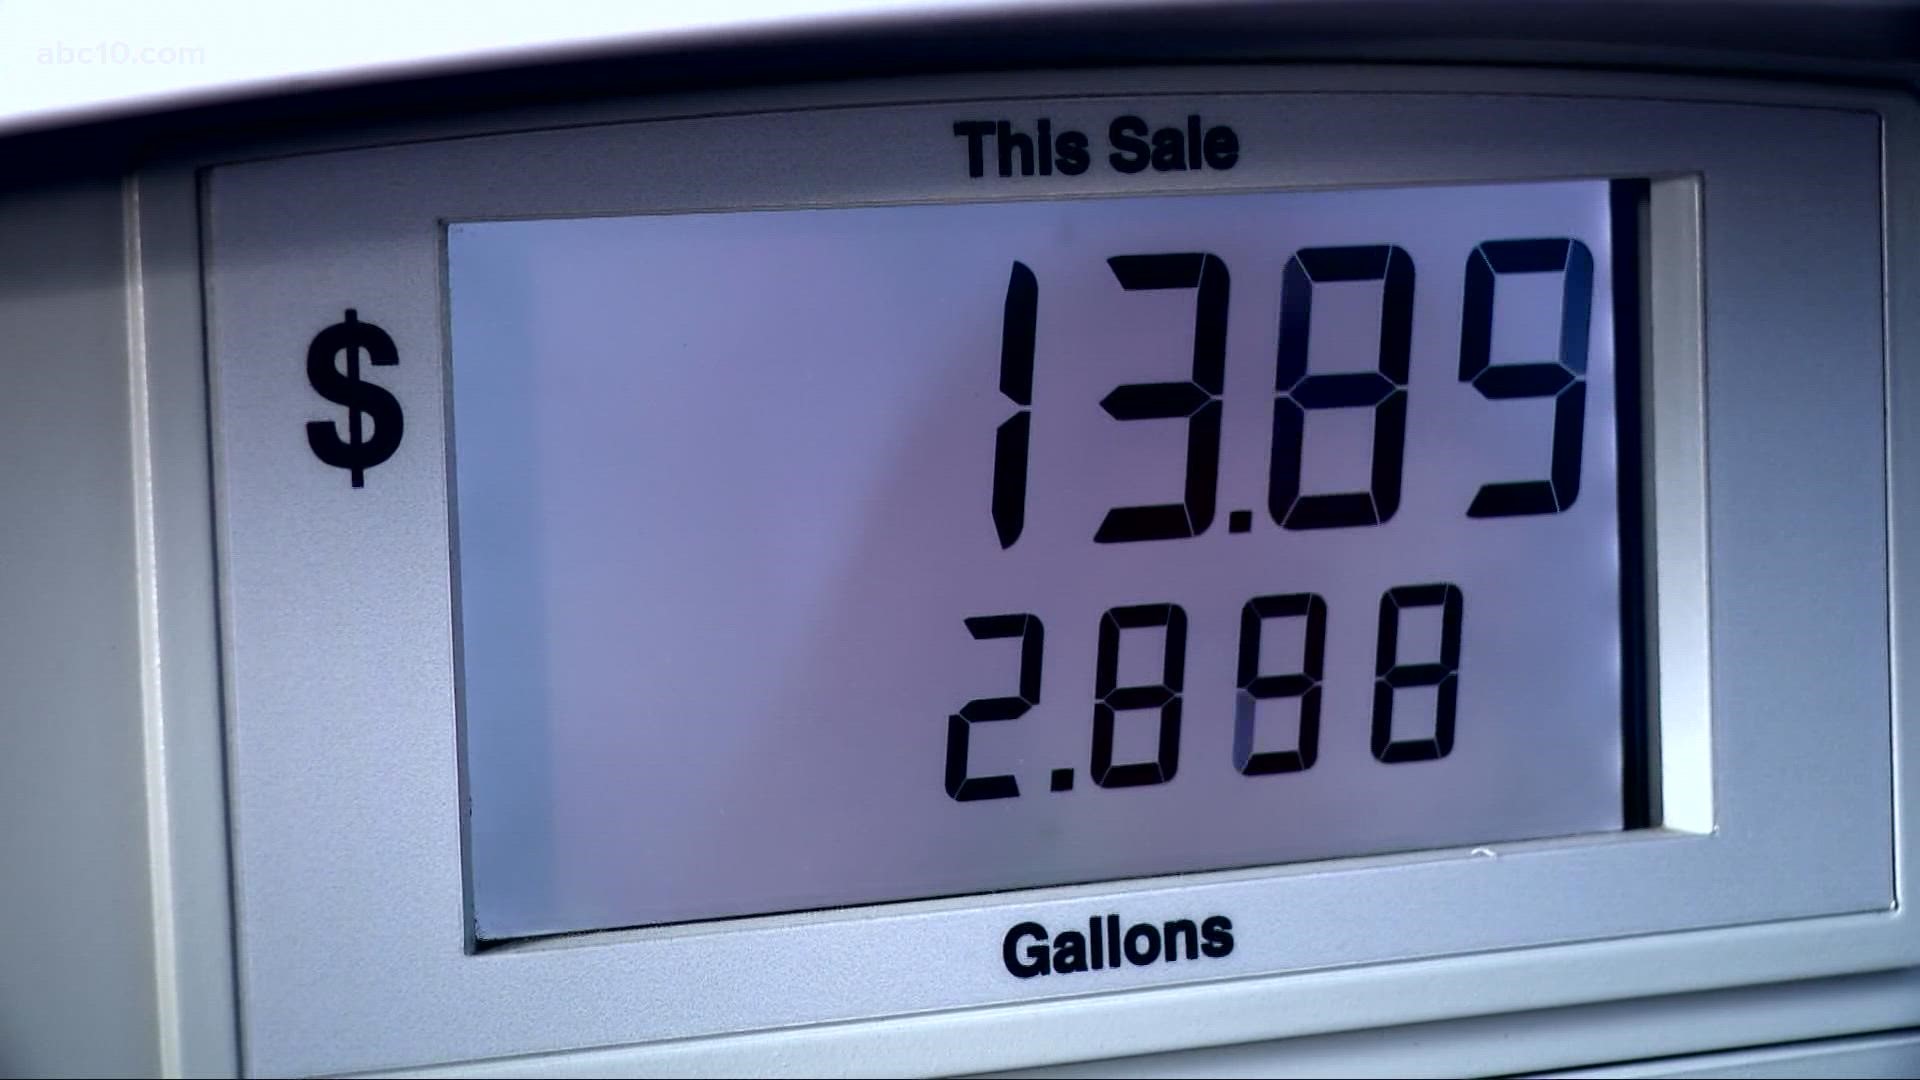 With the highest average gas prices in California more than $5 a gallon, experts at GasBuddy say Wednesday is when prices are the highest because of energy markets.